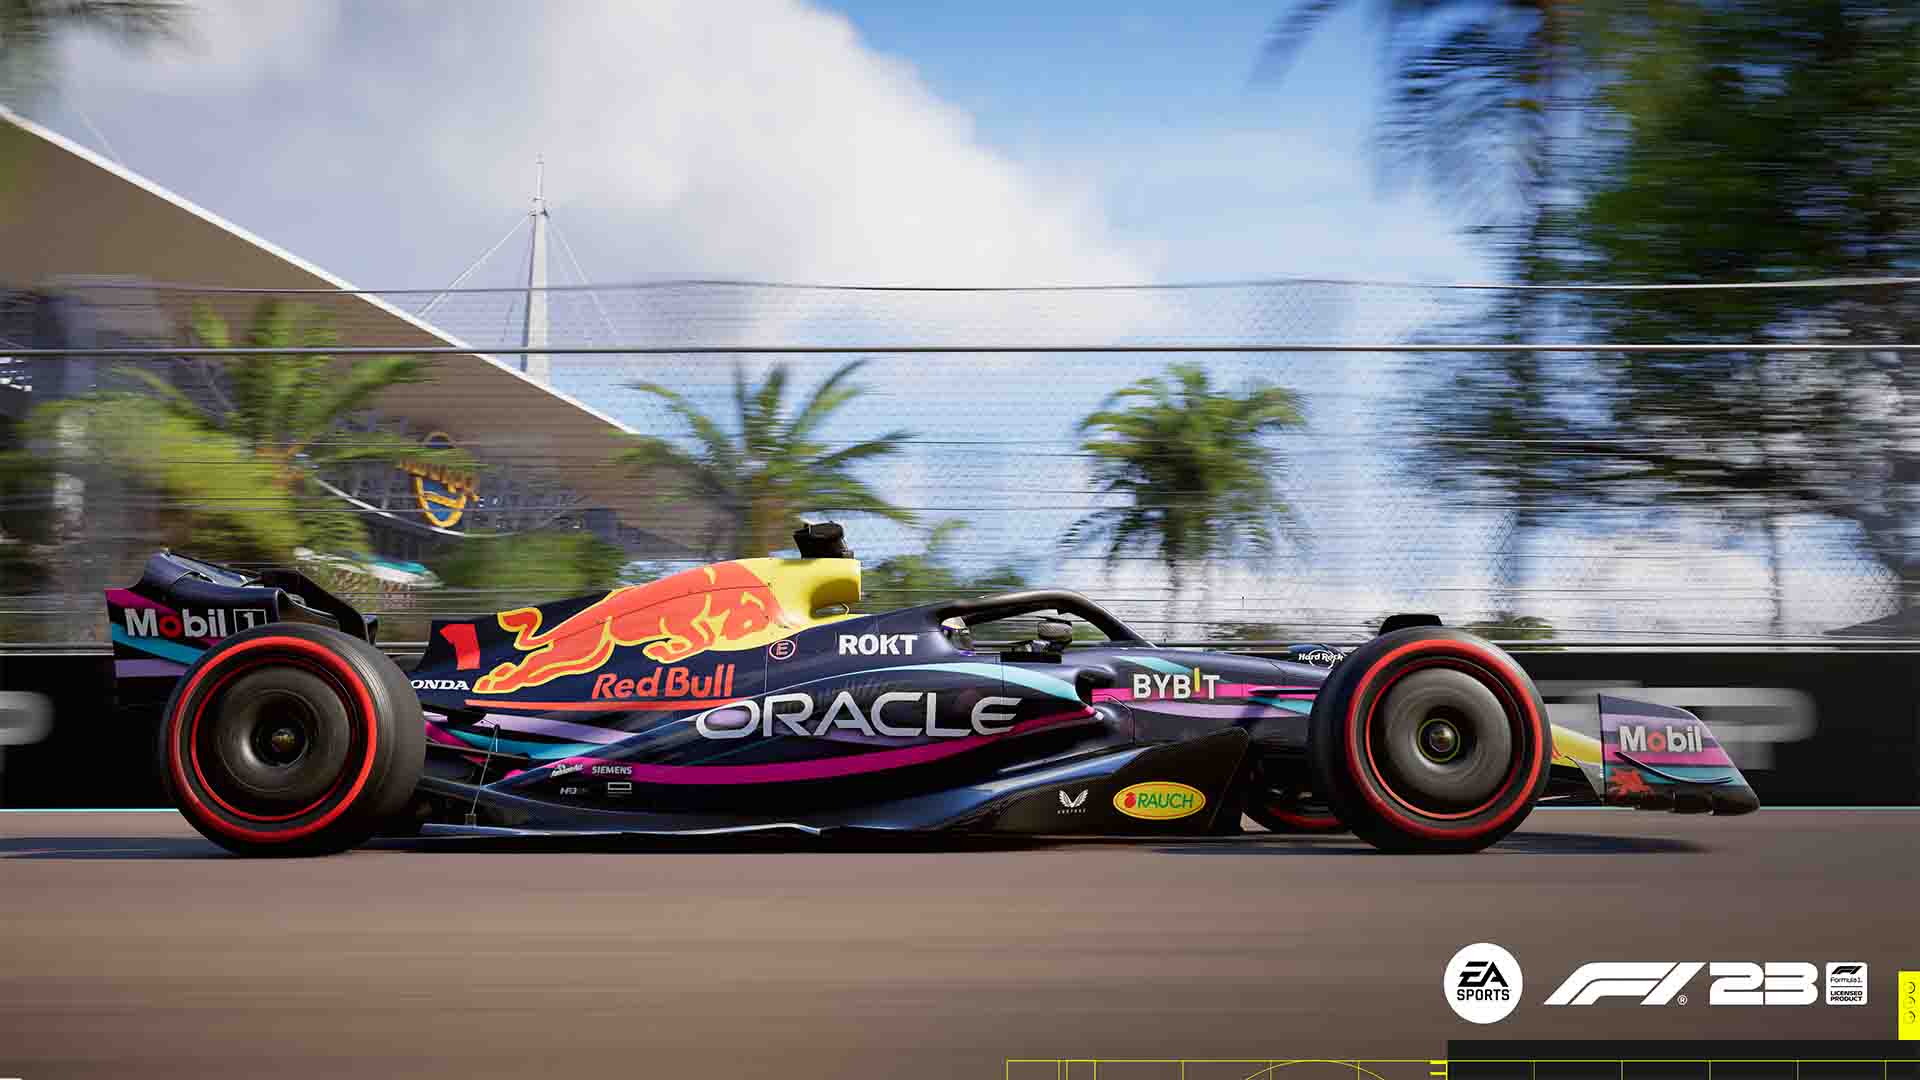 in-game world July real coming 23 EA reveals Sports events F1